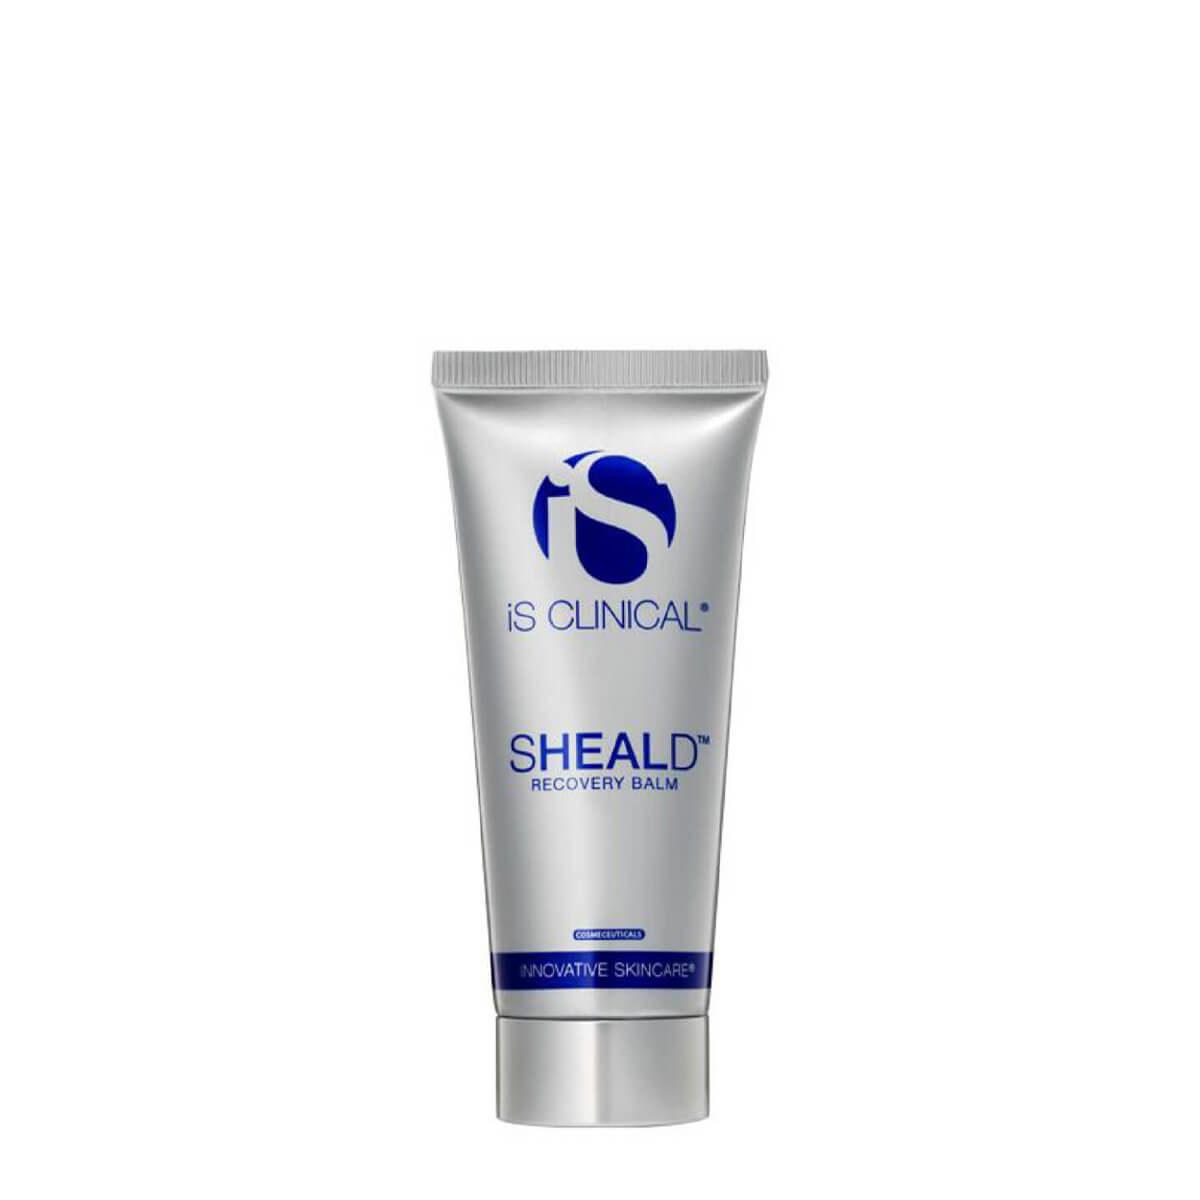 iS Clinical - Sheald Recovery Balm 15g